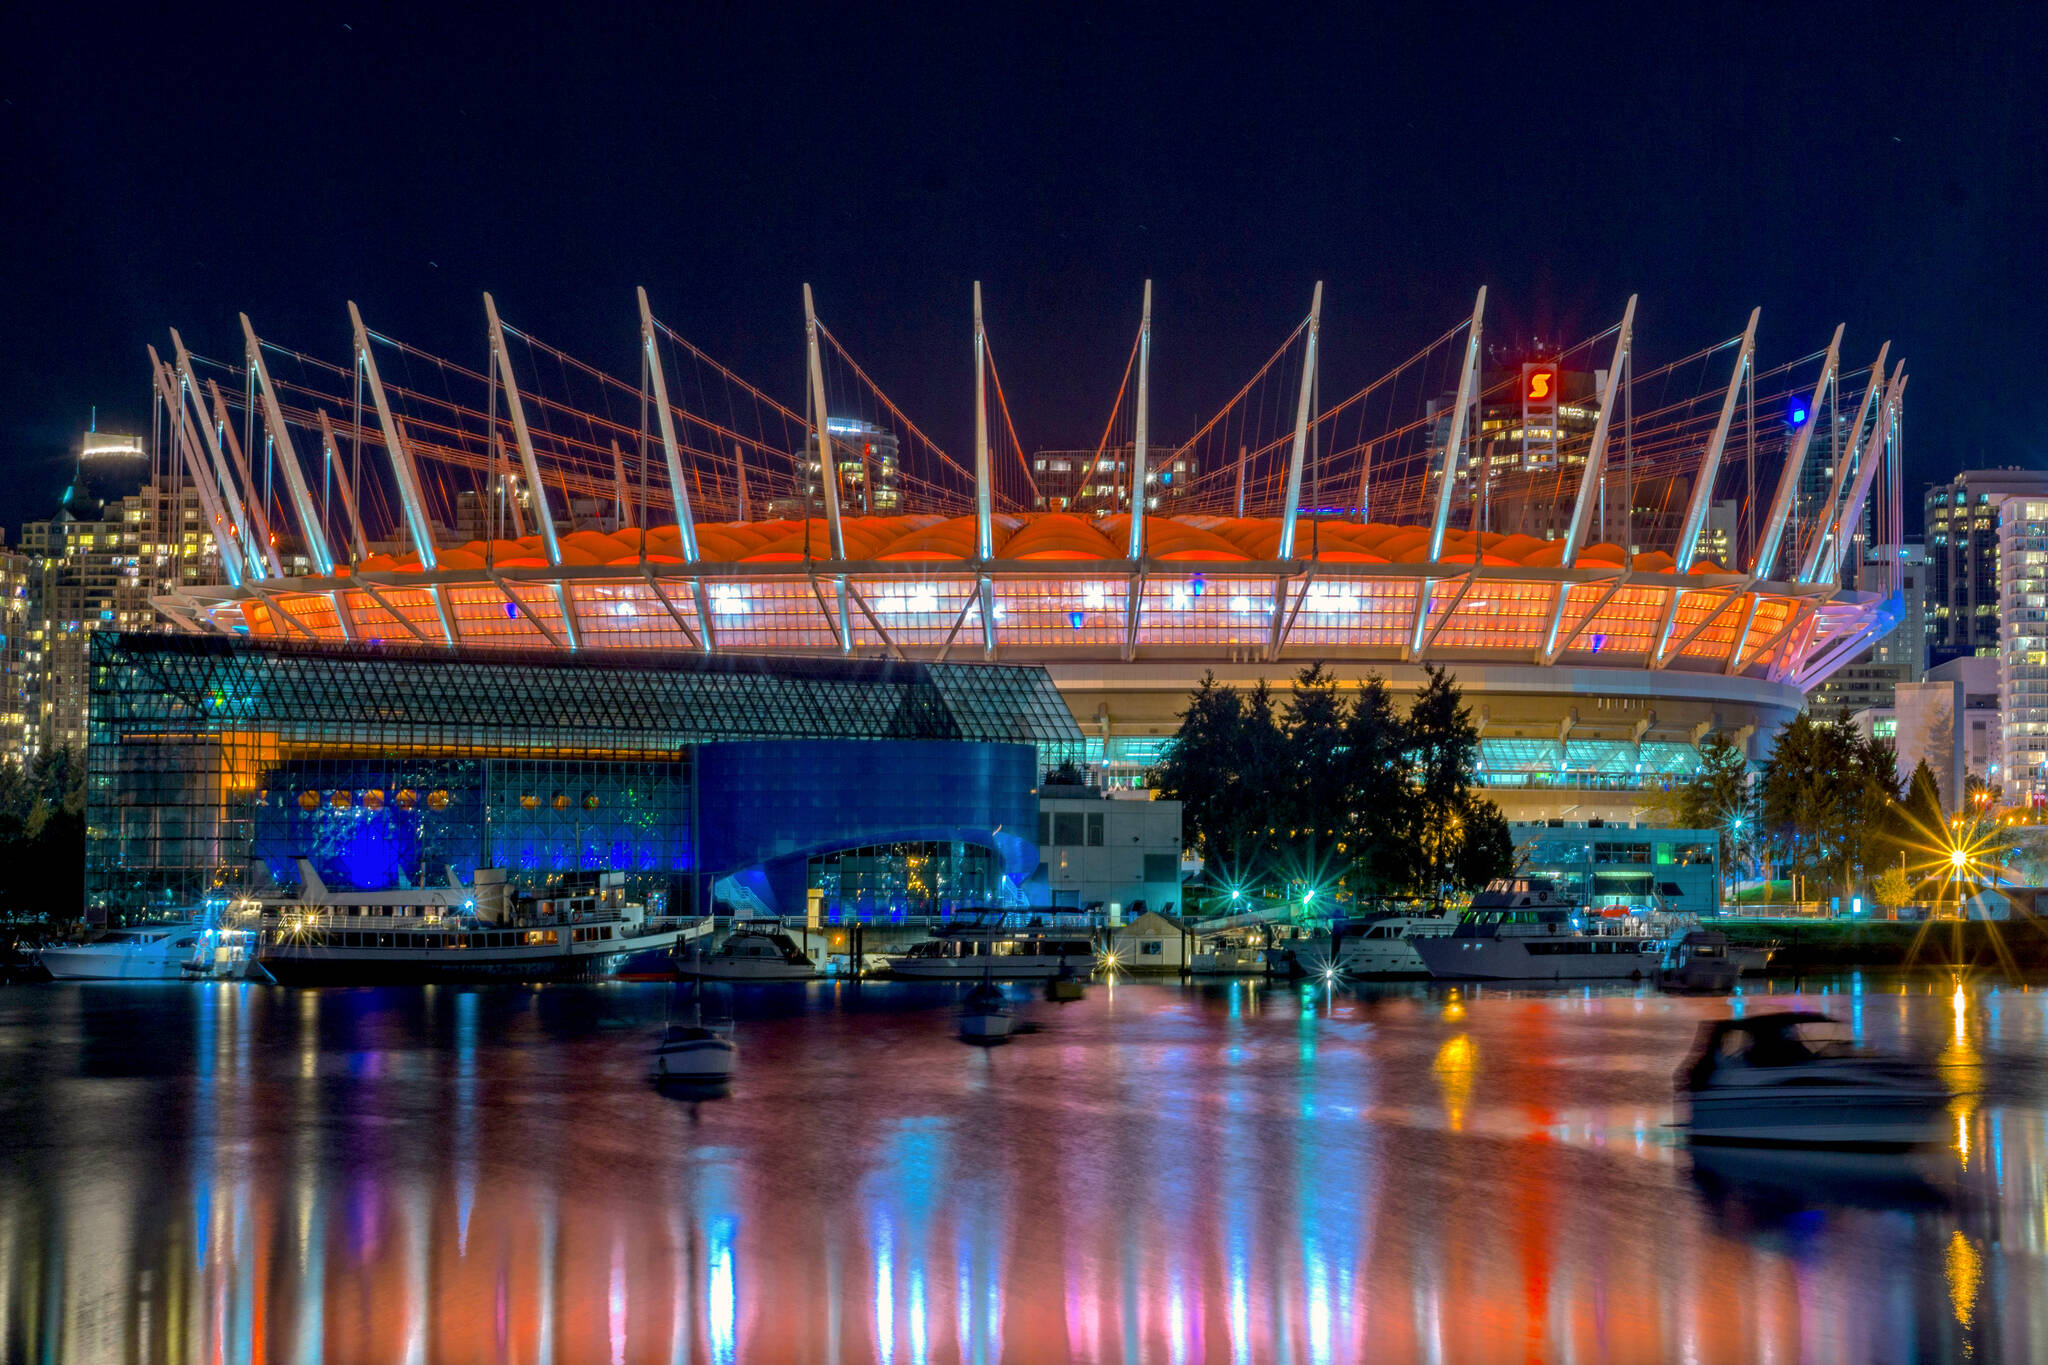 BC Place Stadium will host seven games including two games featuring Canada’s Men’s National Soccer Team when FIFA’s Men’s World Cup, comes to North America. But the Canadian Taxpayers Federation fears growing costs and accused government of lacking transparency. Tourism Minister Lana Popham promised to release a “full package” of information, which is government is able to share. (Ryan Adams/Wikimedia Commons)